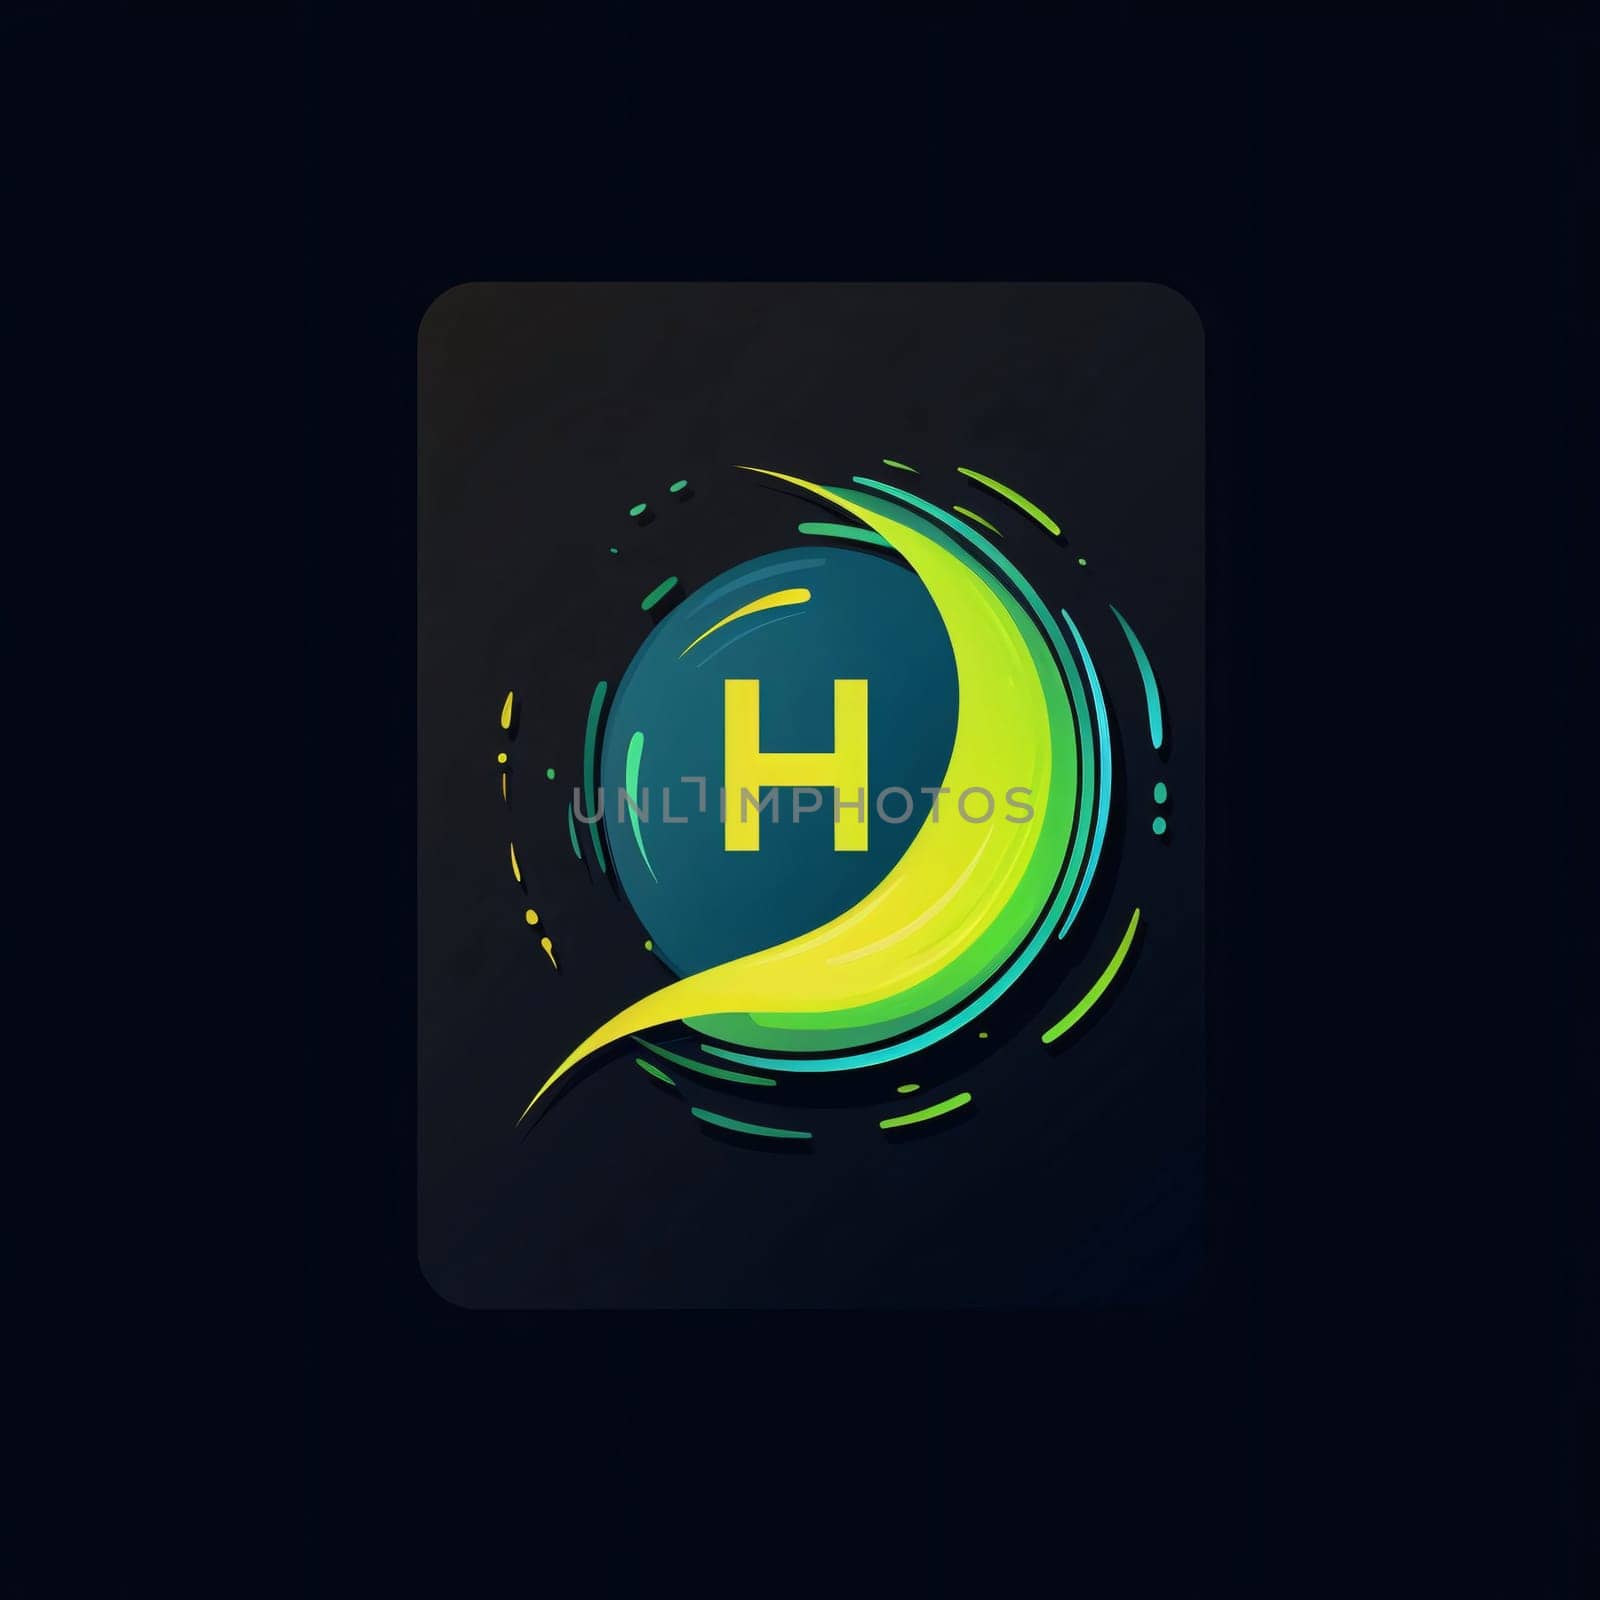 Graphic alphabet letters: Letter H logo icon design template elements for your application or corporate identity.